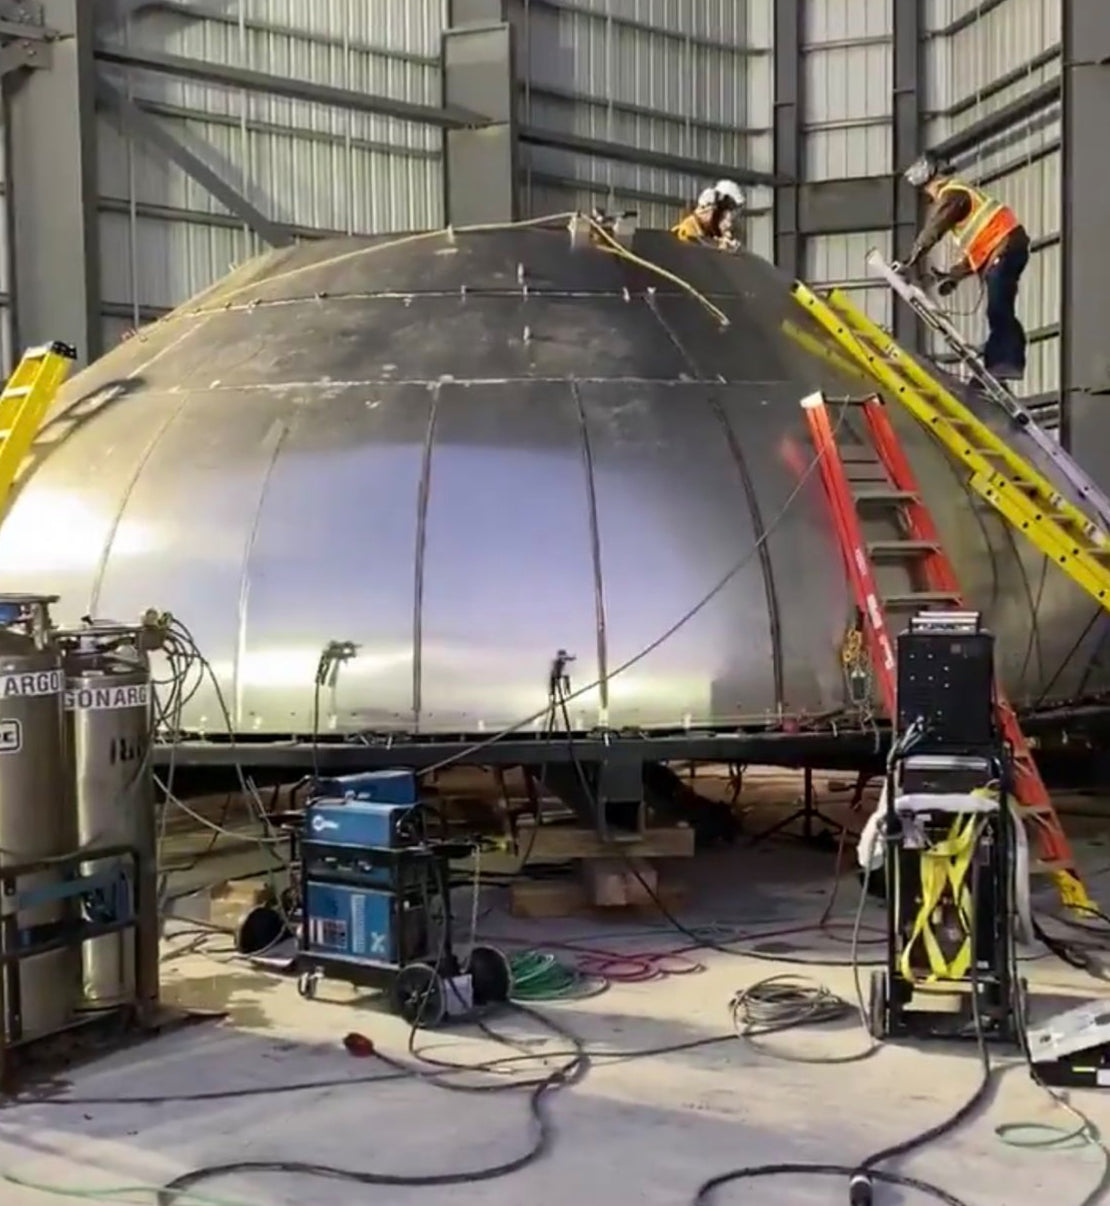 Elon Musk is working alongside SpaceX teams on Starship Mk3 at Boca Chica